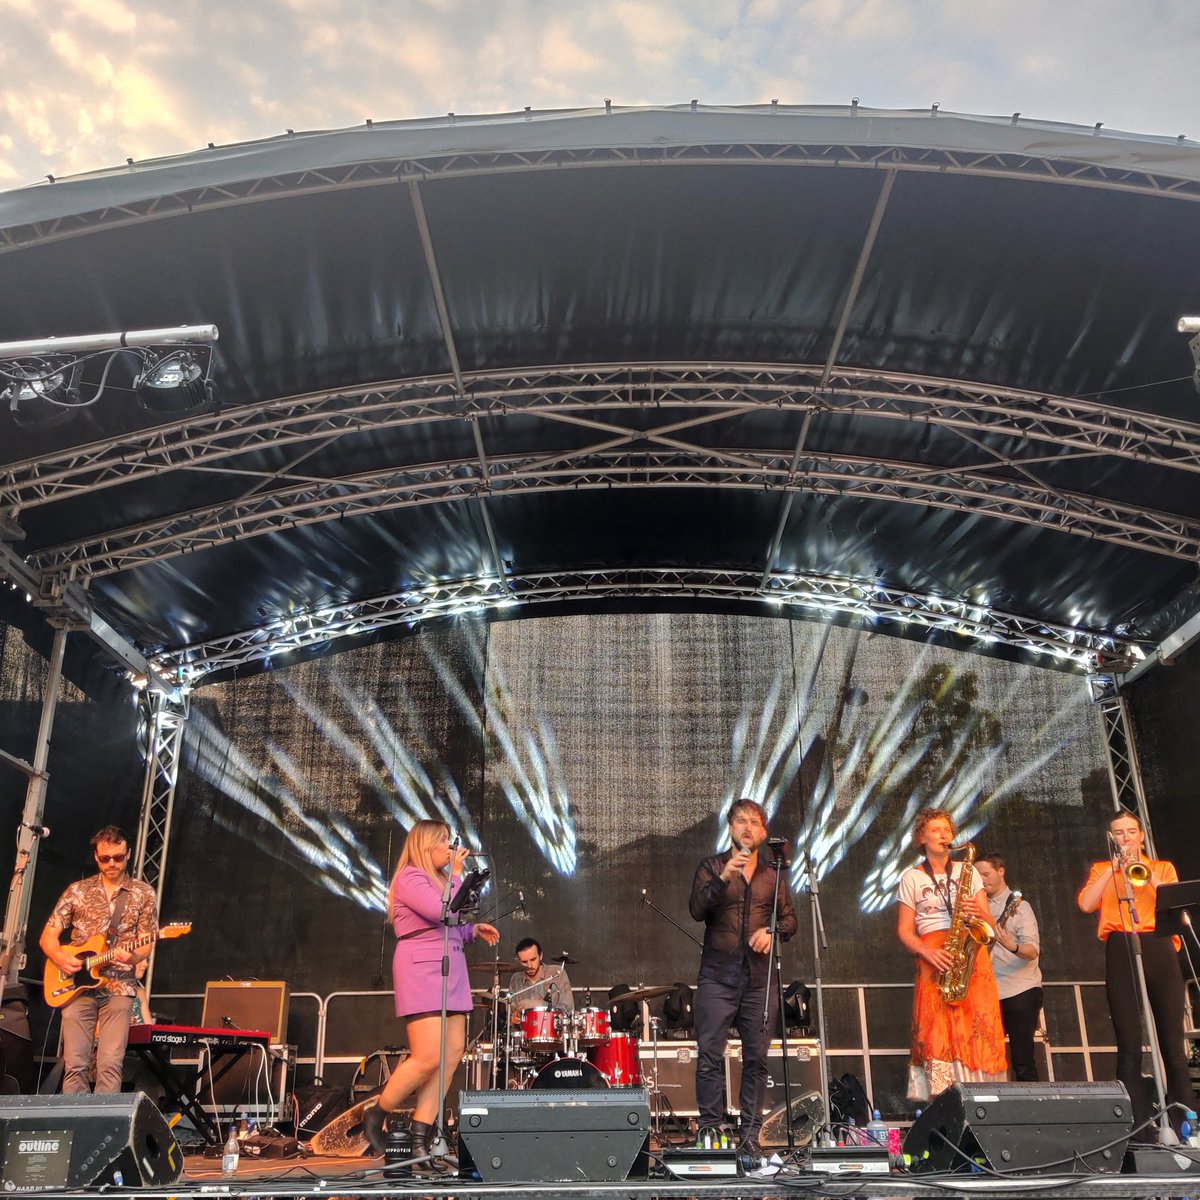 The final song from the final band of the #SoulFest2022 #BlockParty ! Thank you all so much for joining us and remember #CORKSGOTSOUL